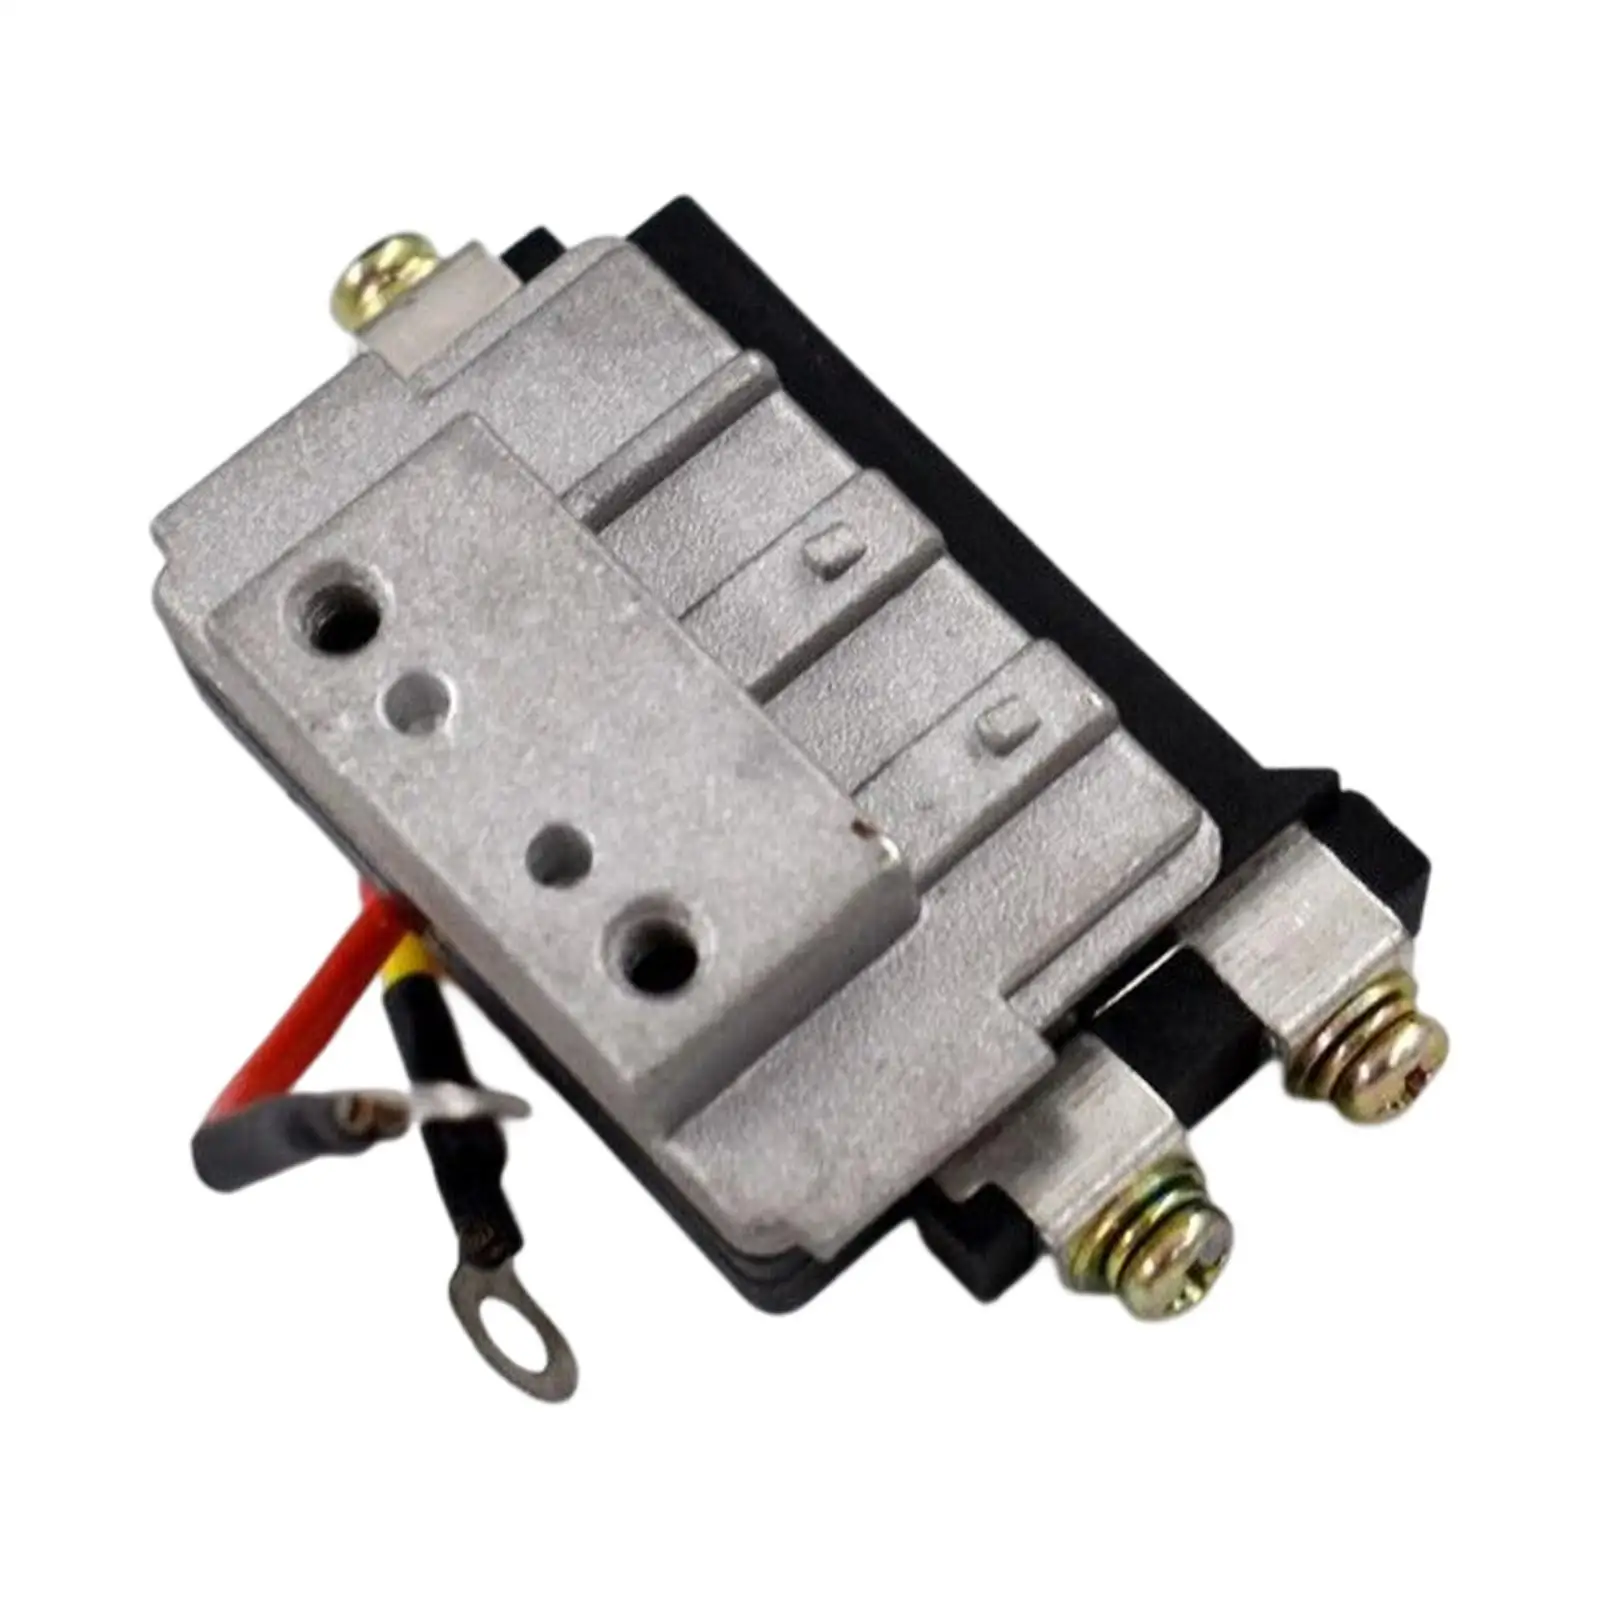 Ignition Control Module Direct Replaces for Toyota Corolla 1993- 1995